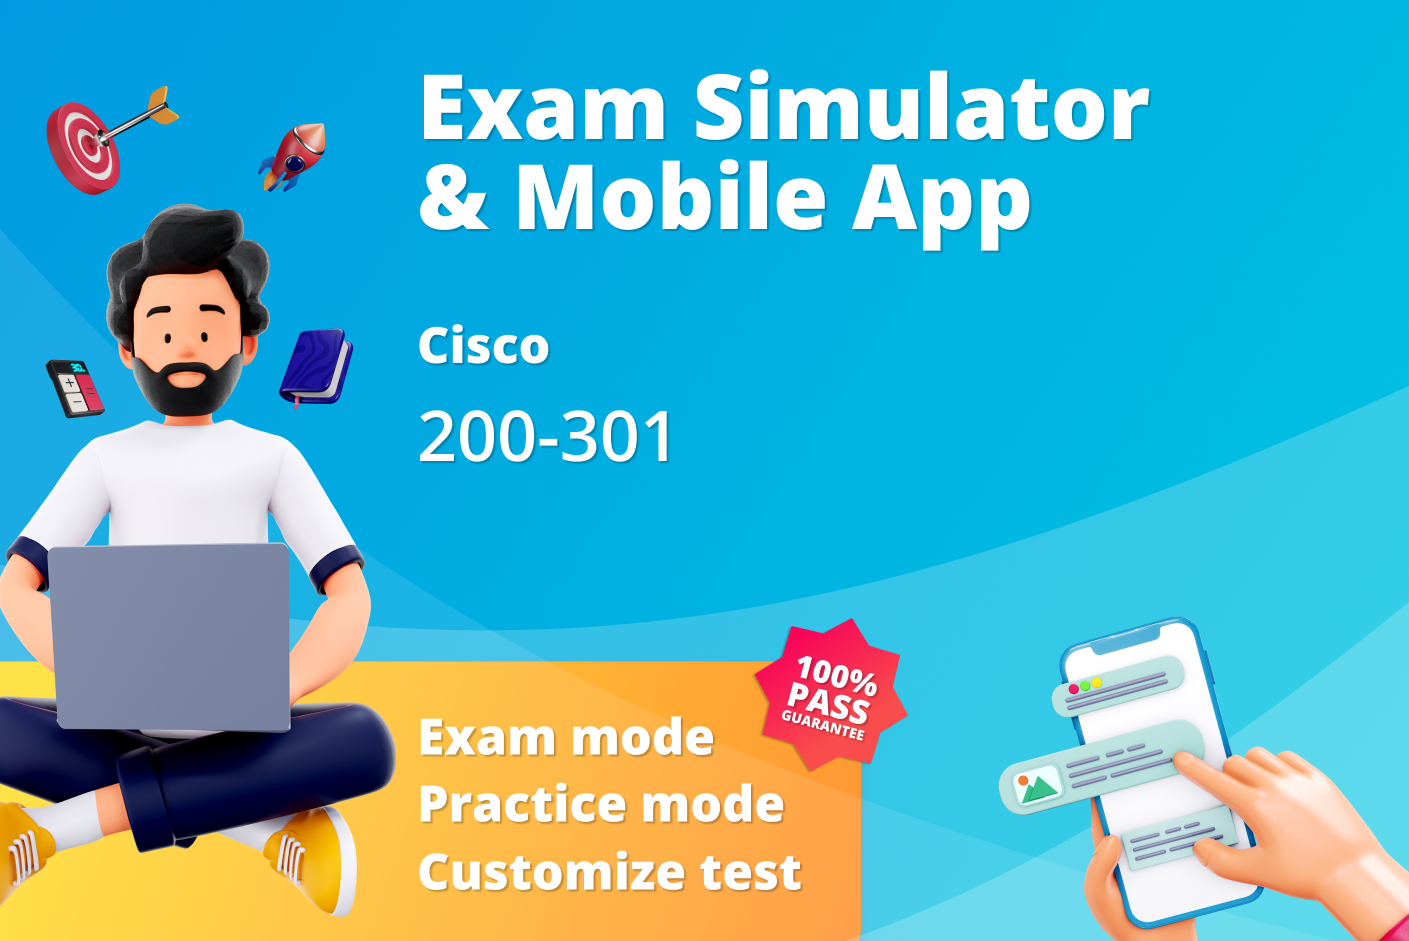 Cisco 200-301 mock exam in India - Boost your network skills with our comprehensive practice test